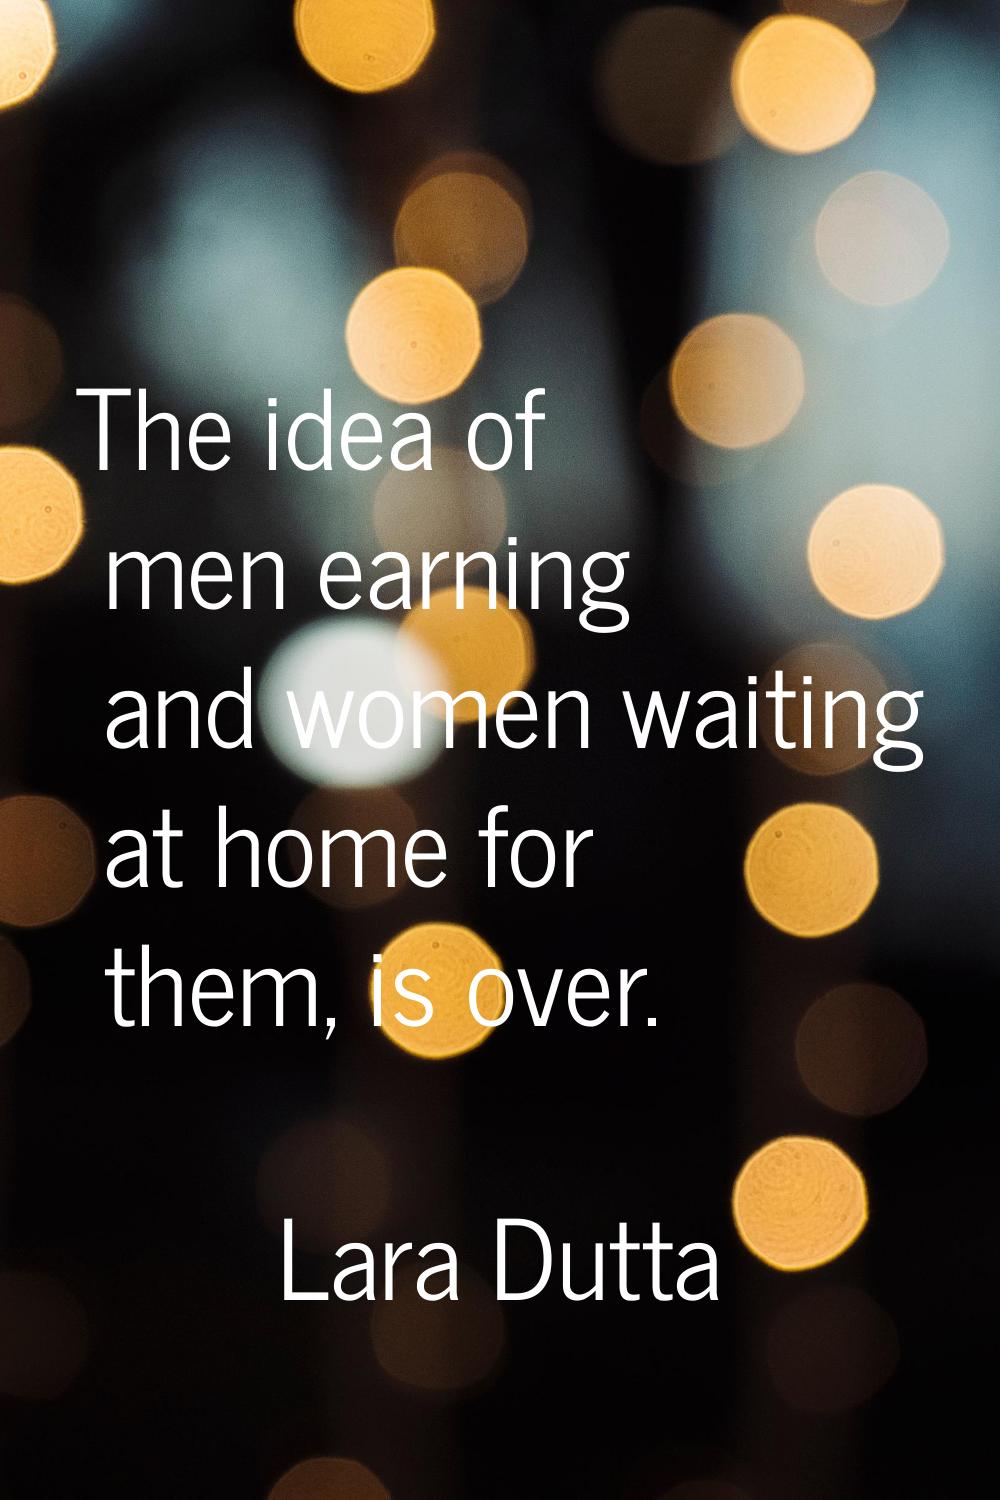 The idea of men earning and women waiting at home for them, is over.